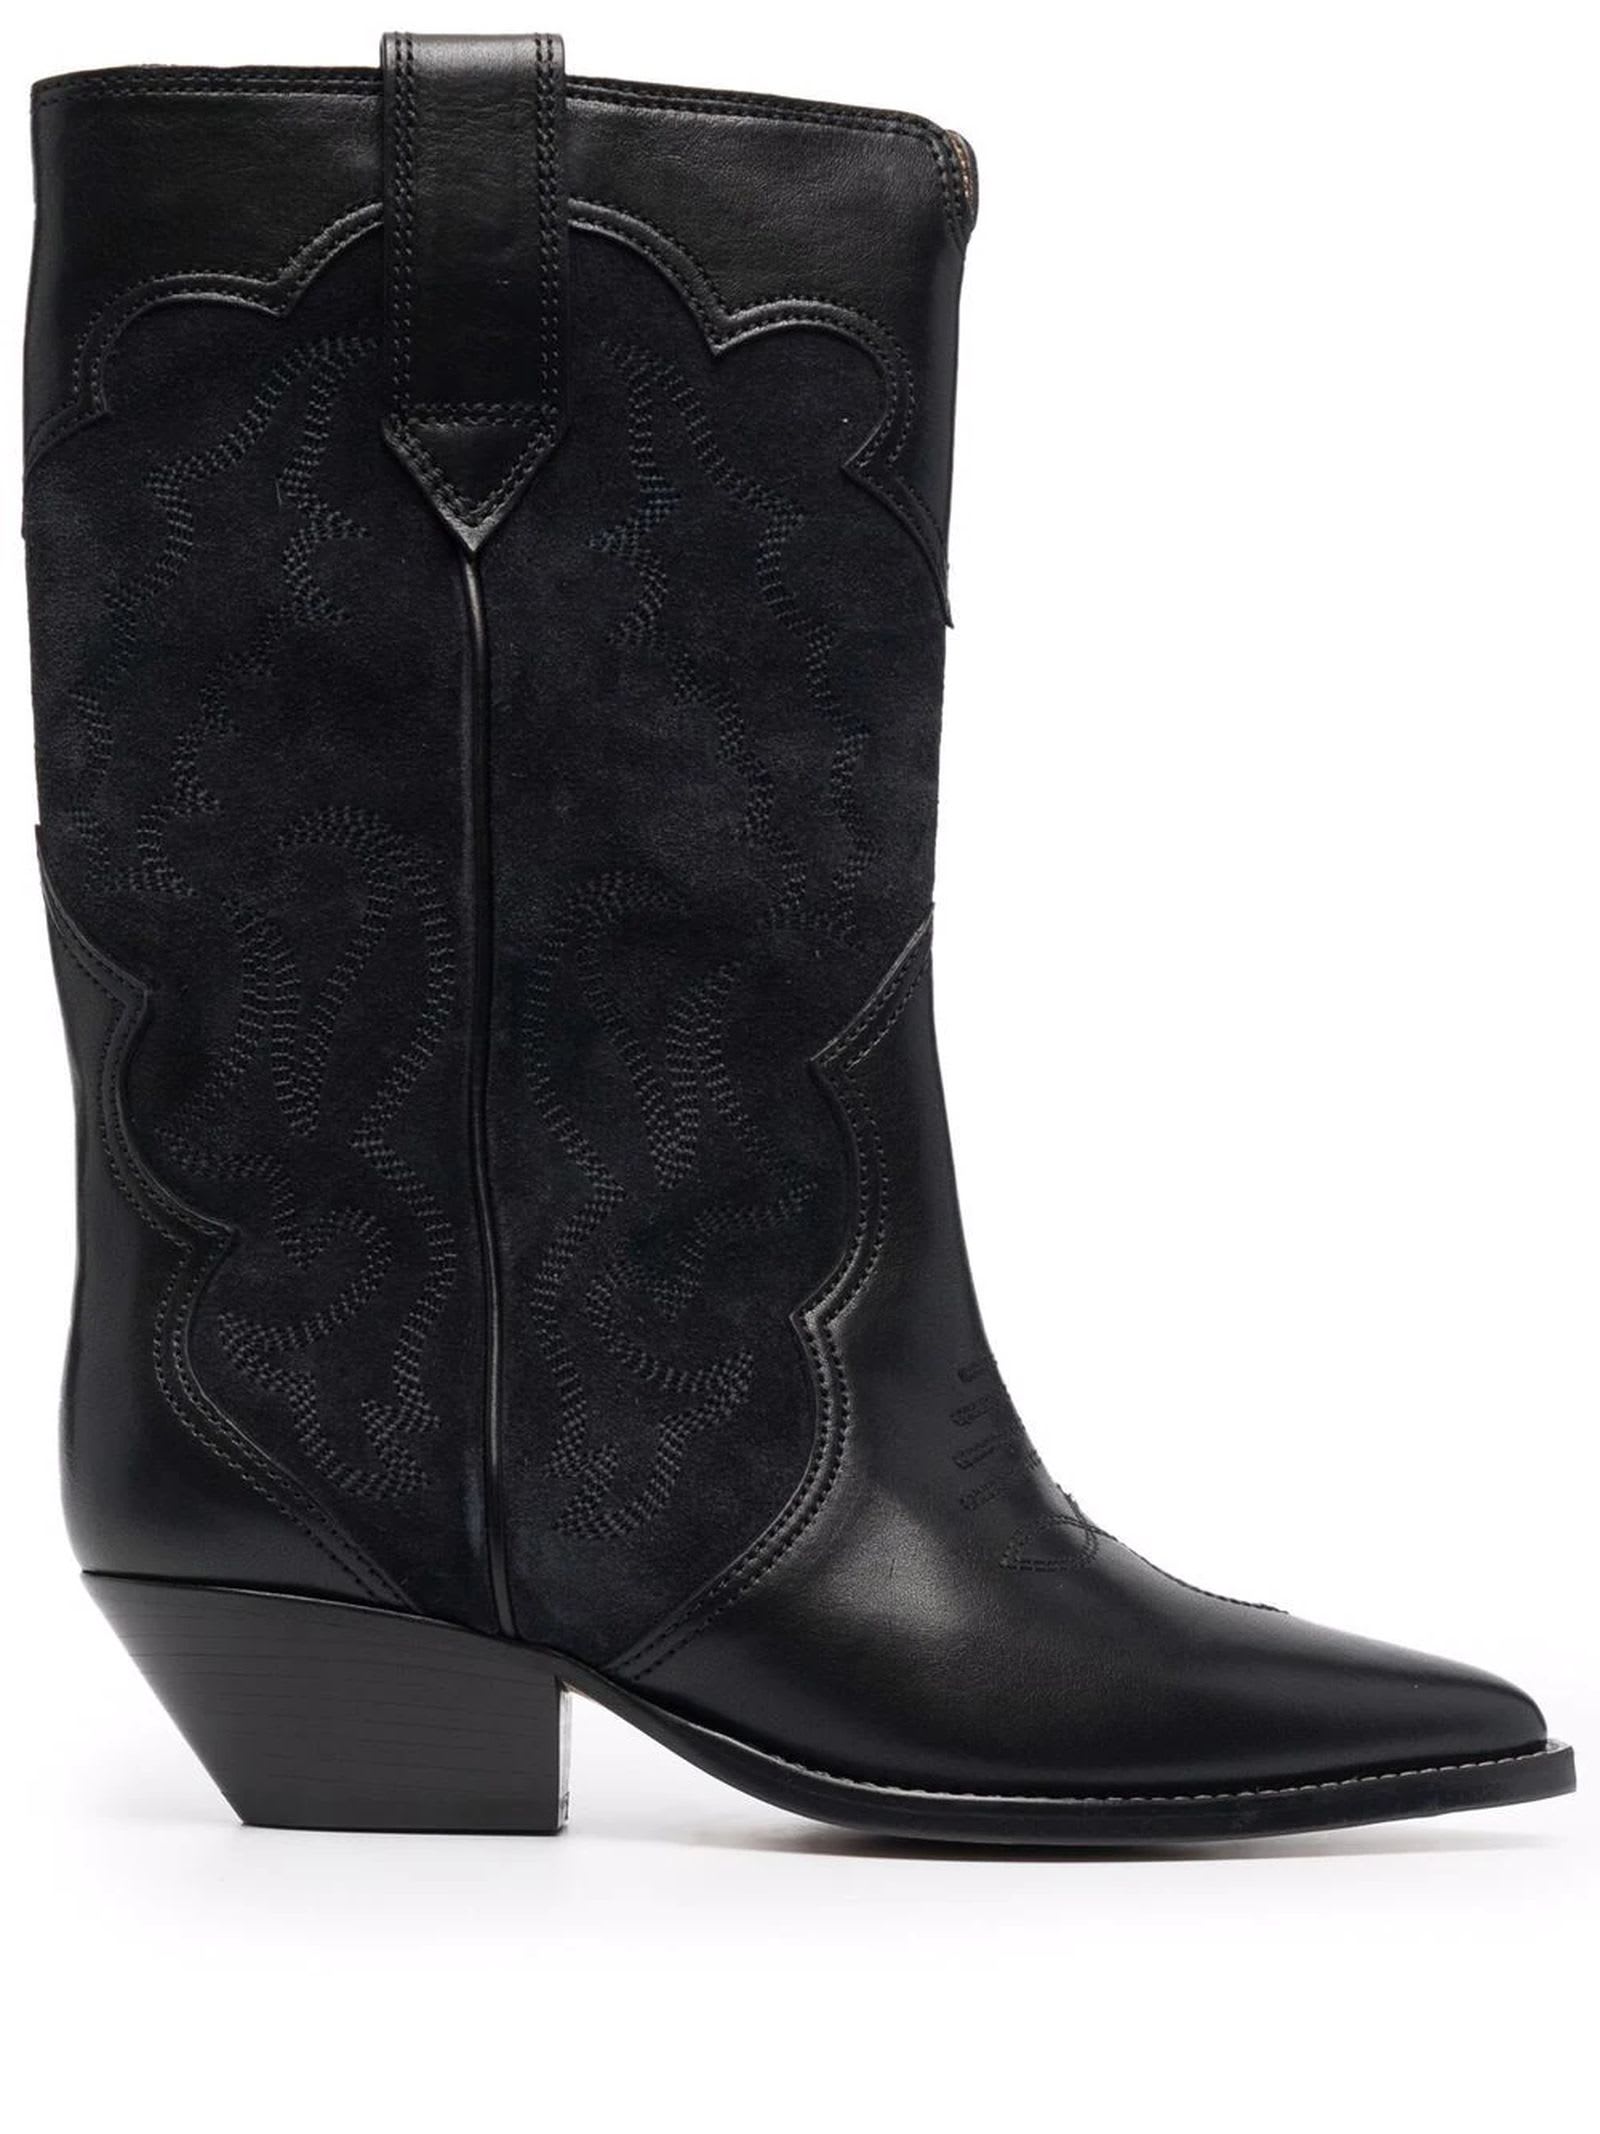 Buy Isabel Marant Black Calf Leather Duerto Cowboy Boots online, shop Isabel Marant shoes with free shipping